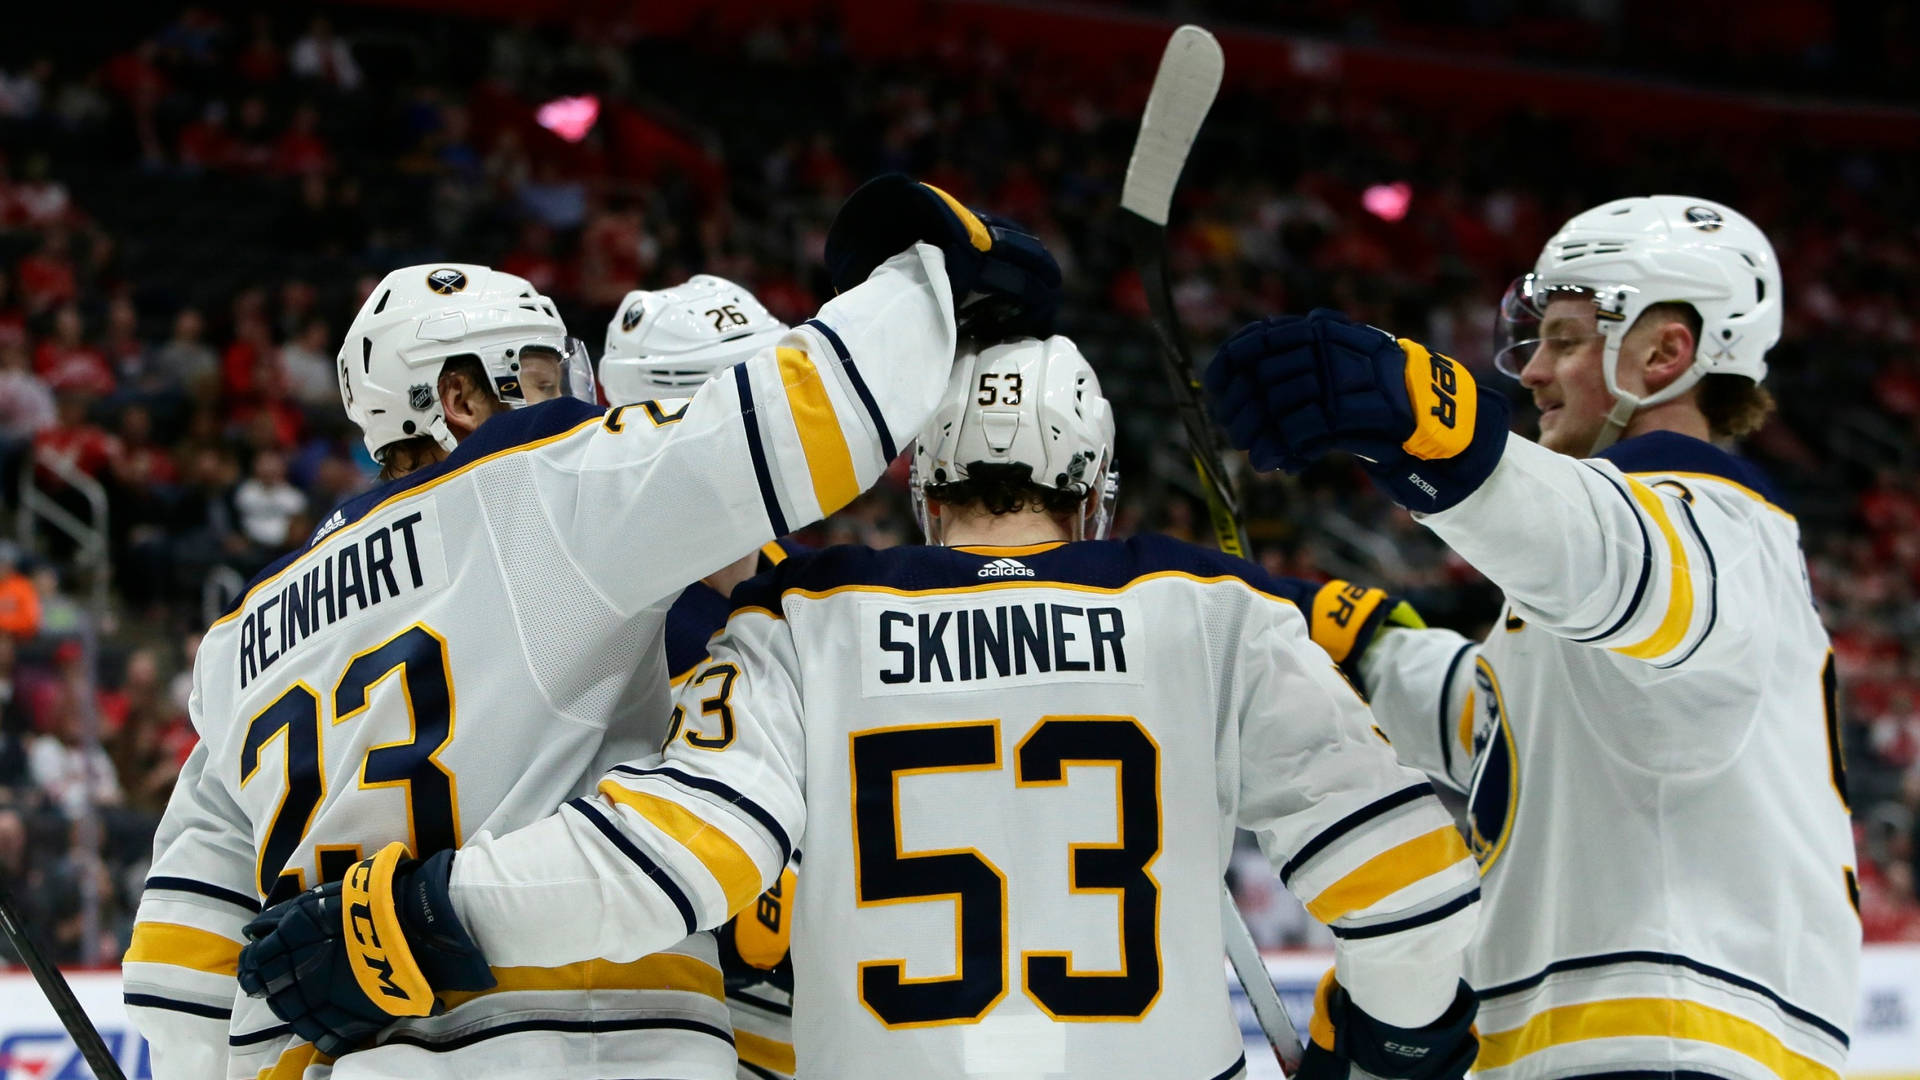 Canadian Nhl Player Jeff Skinner With Buffalo Sabres Teammates Wallpaper